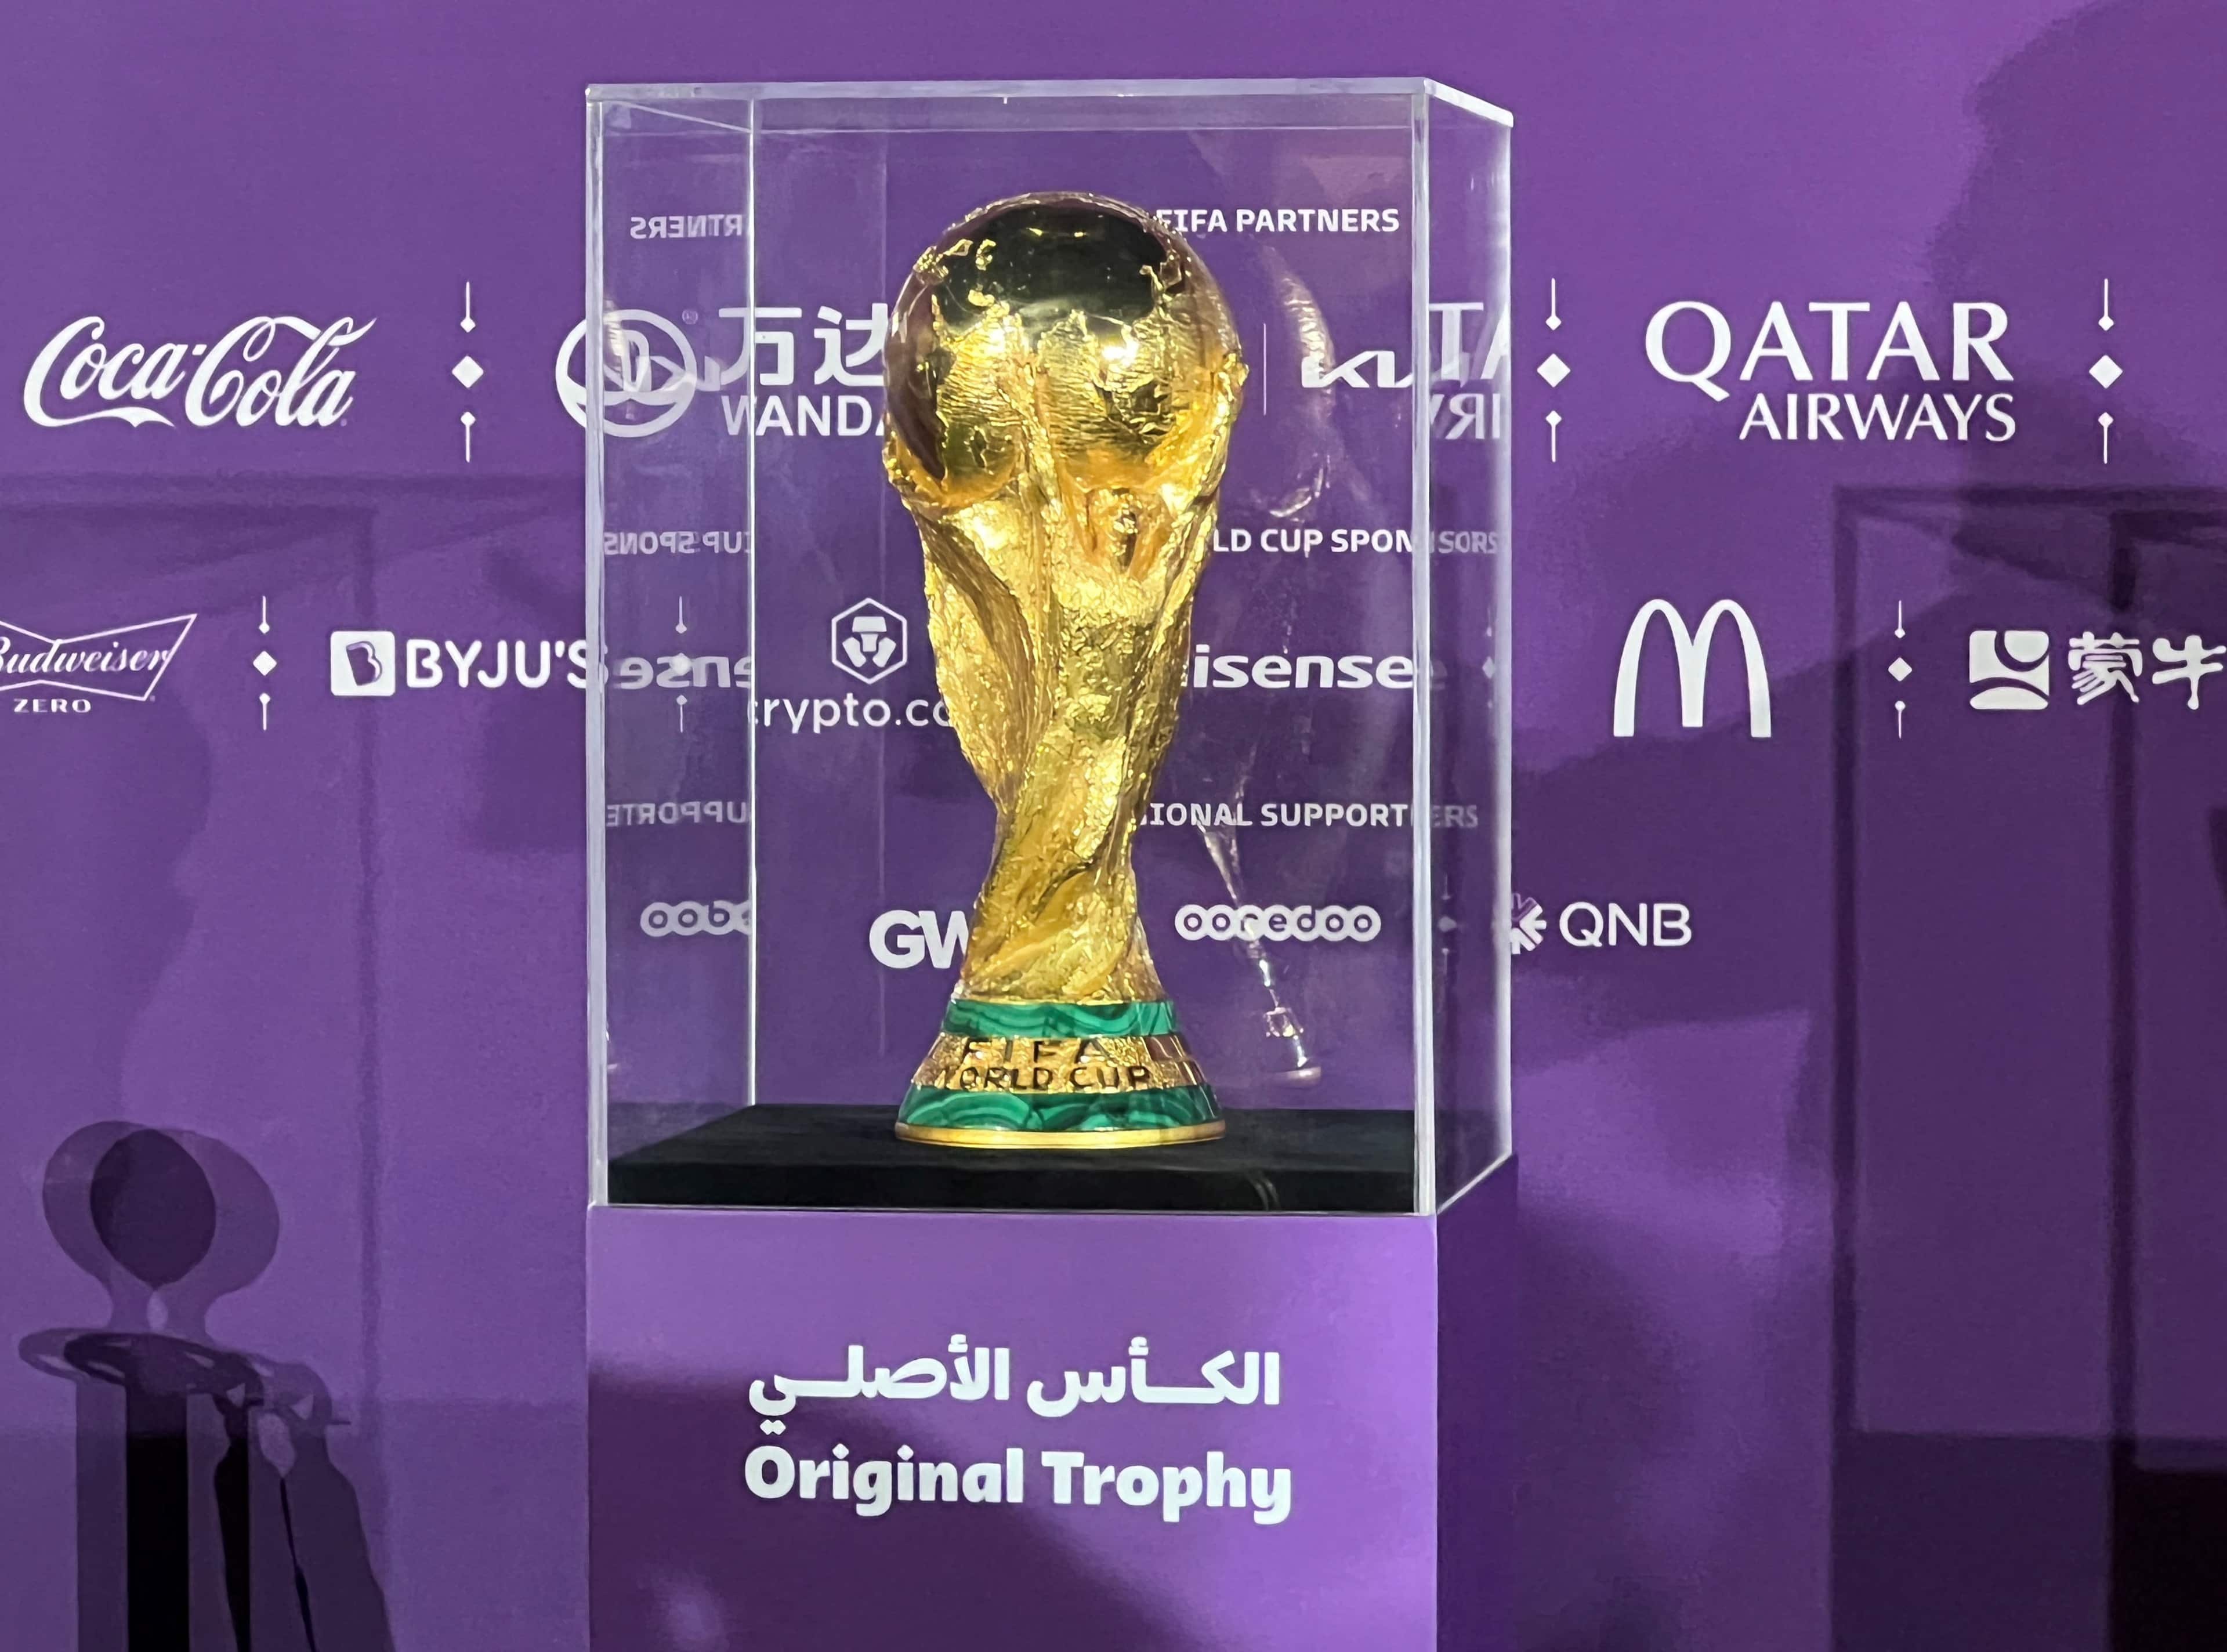 Fifa World Cup Qatar 2022 live scores, results and fixtures